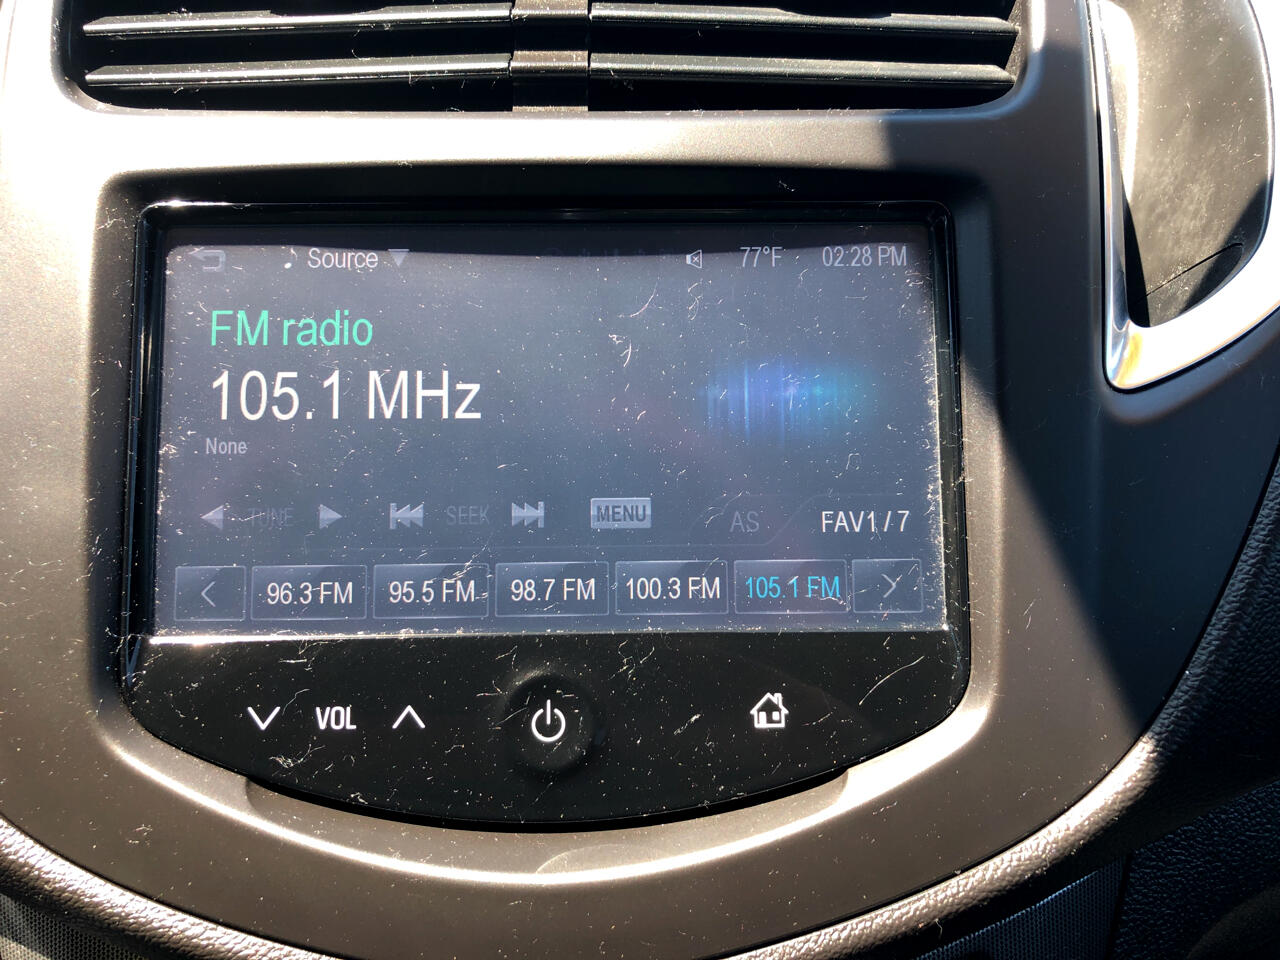 2016 chevy trax awd radio features